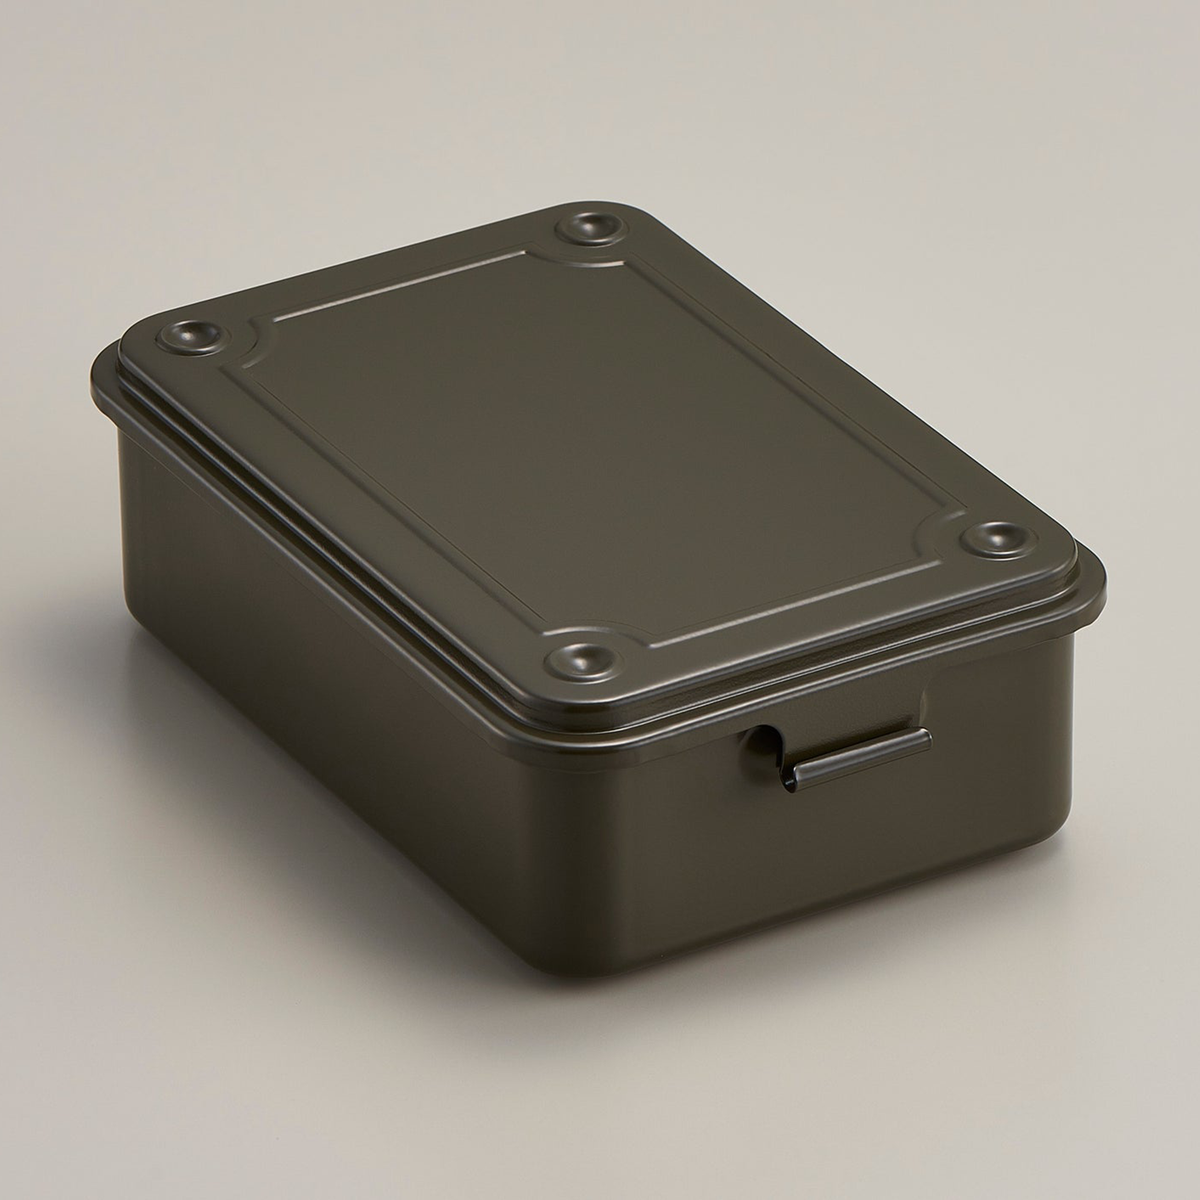 AMEICO - Offiicial Distributor of Toyo Steel Co. Toolboxes